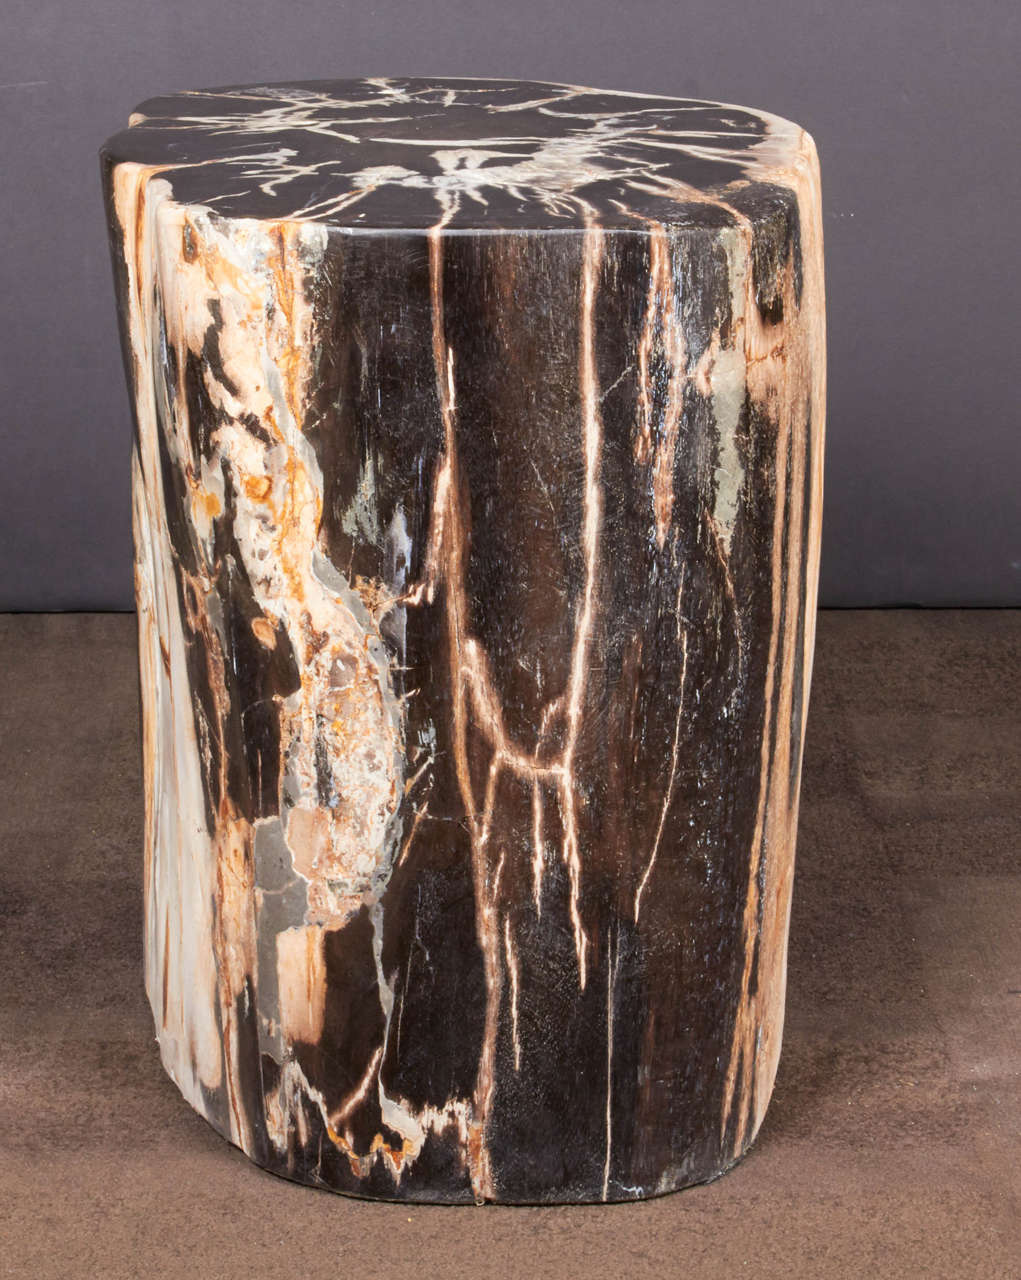 Polished Exquisite Petrified Wood Side Table with Natural Striped Top